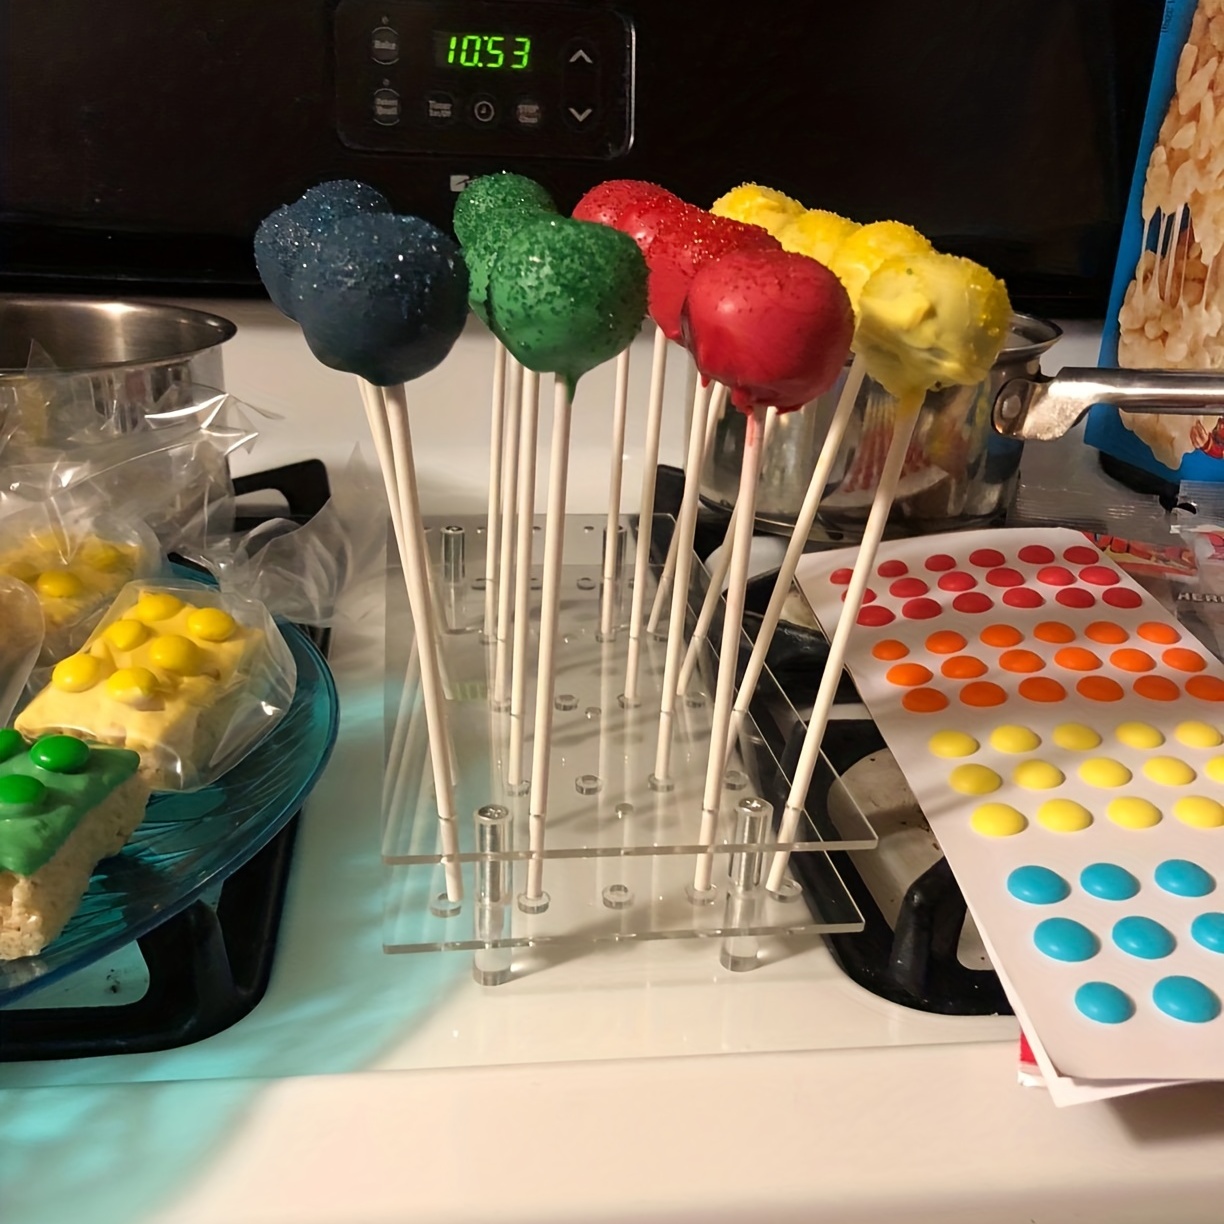 The Eight Planets cake pops : r/Baking